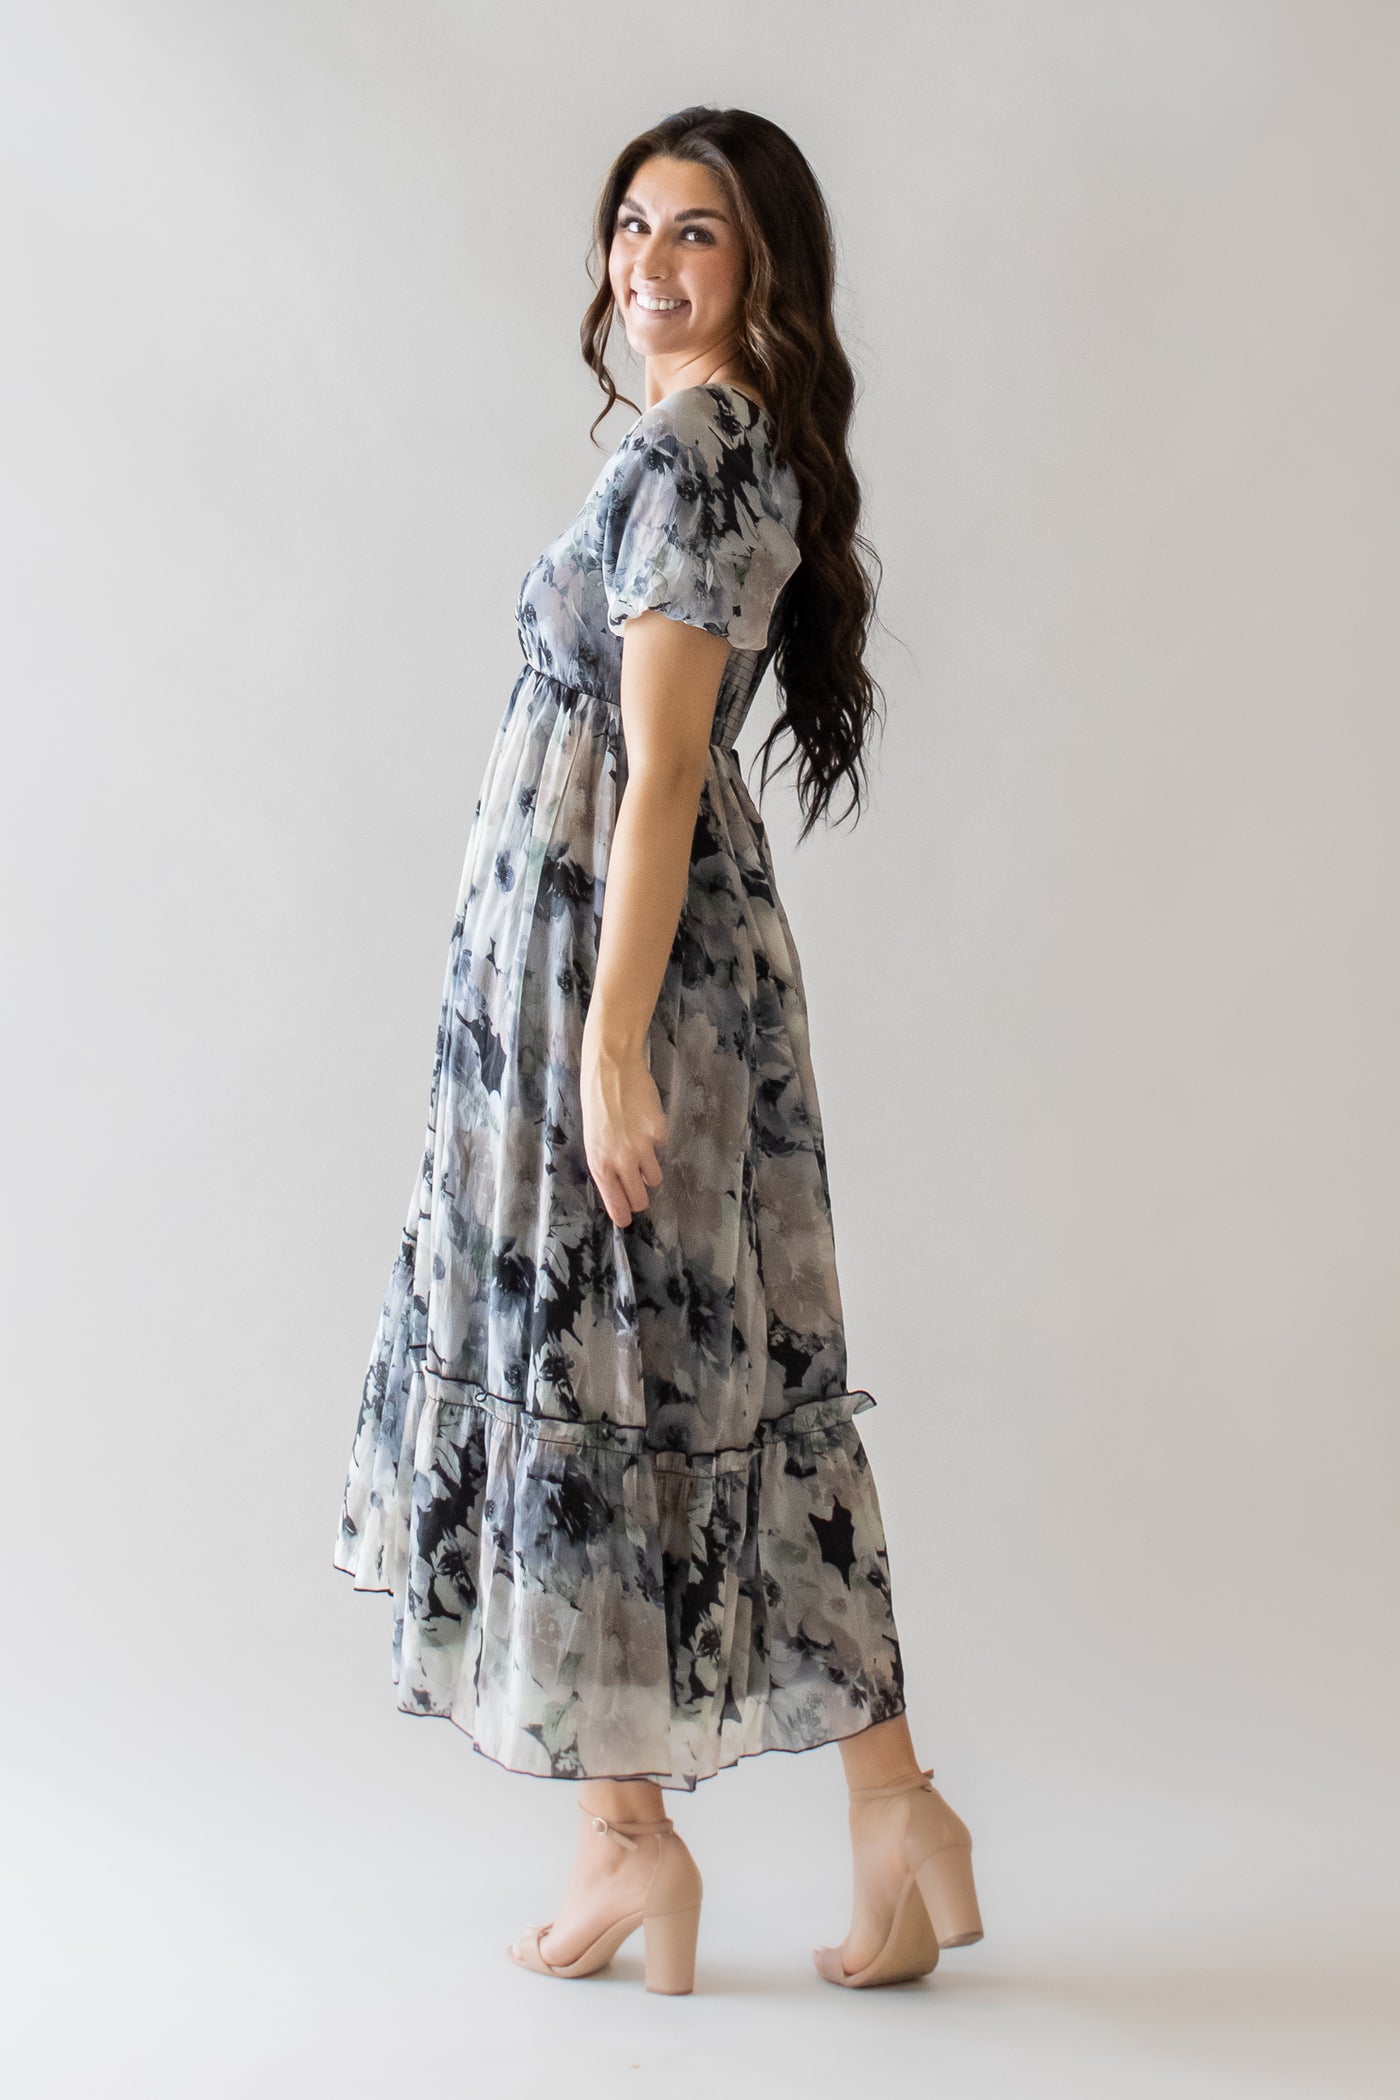 This is a modest dress with a square neckline and black floral details.